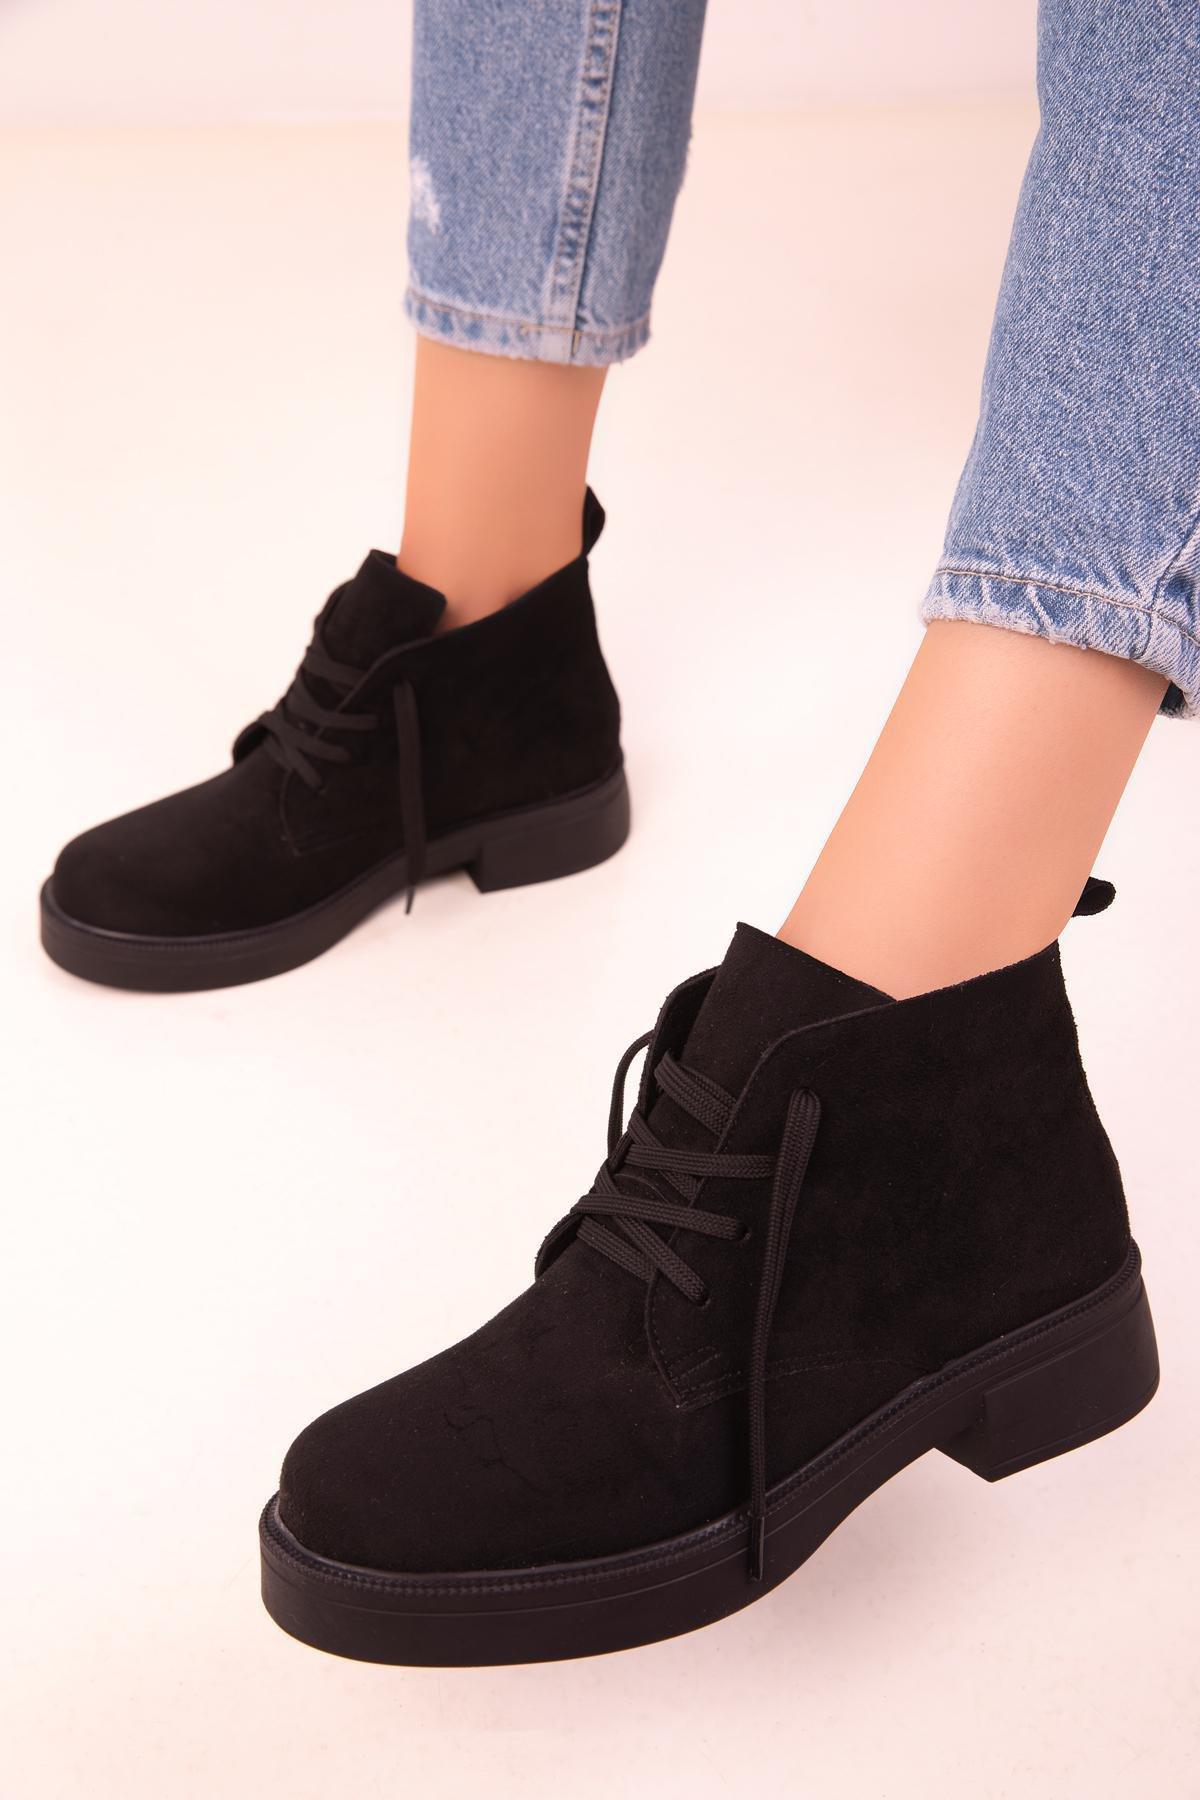 SOHO - Black Casual Suede Boots